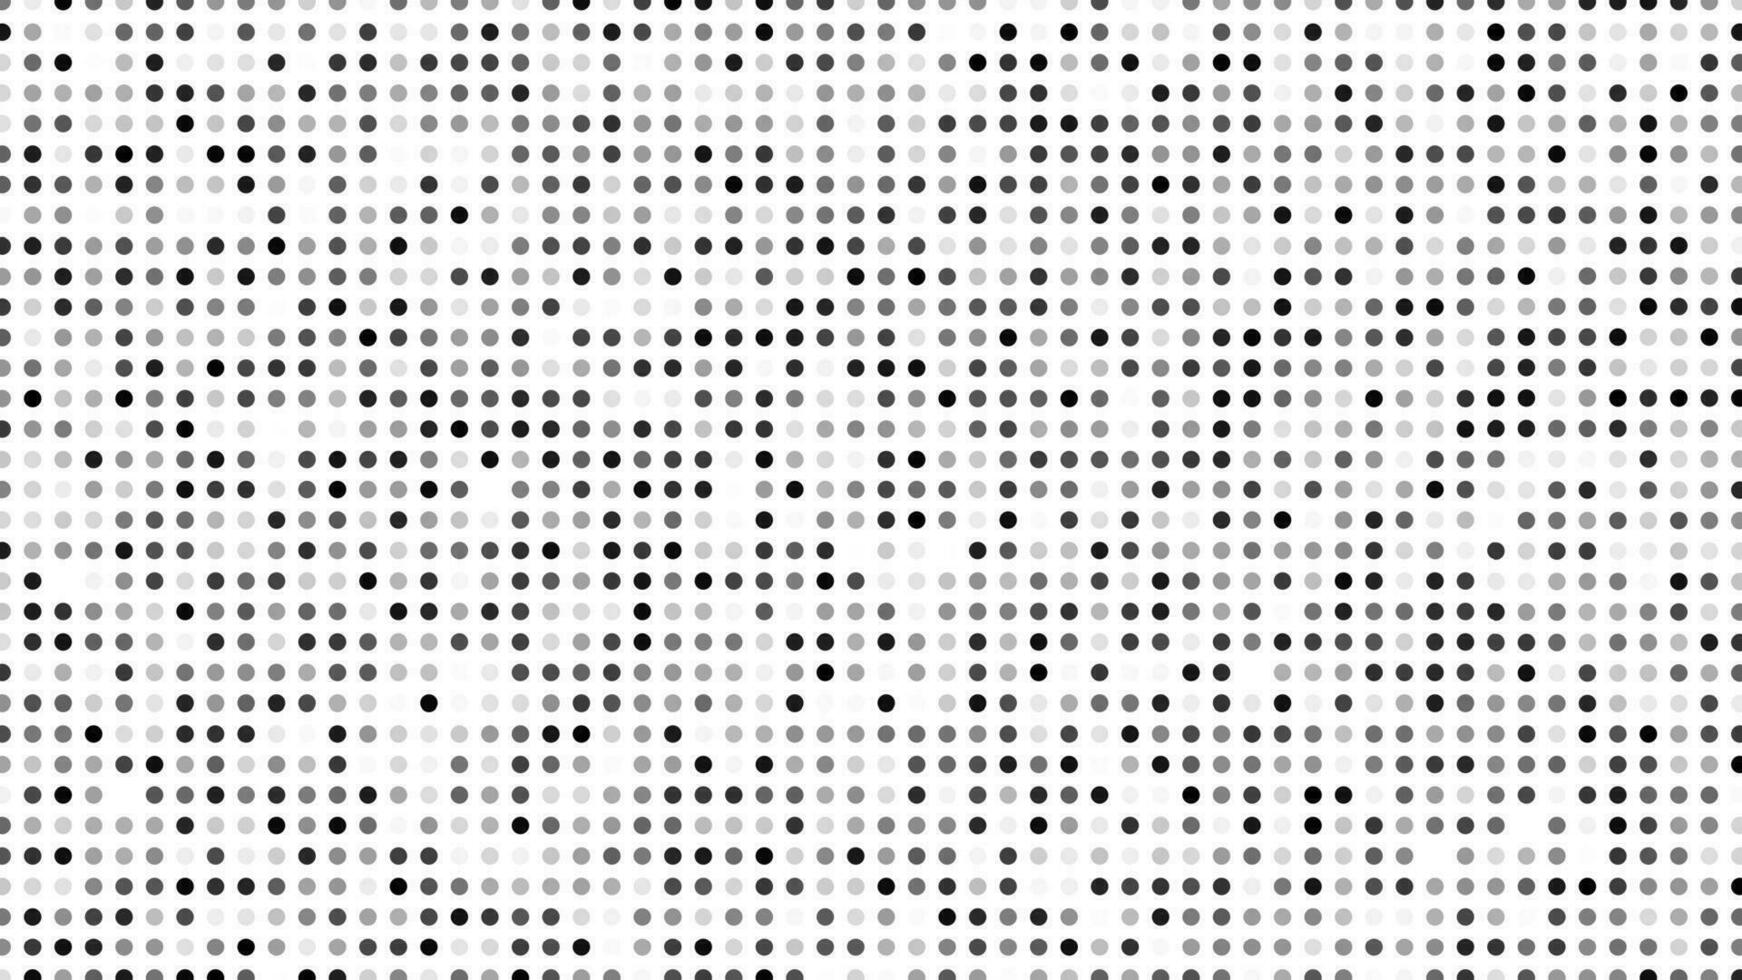 Monochrome halftone background with dots vector